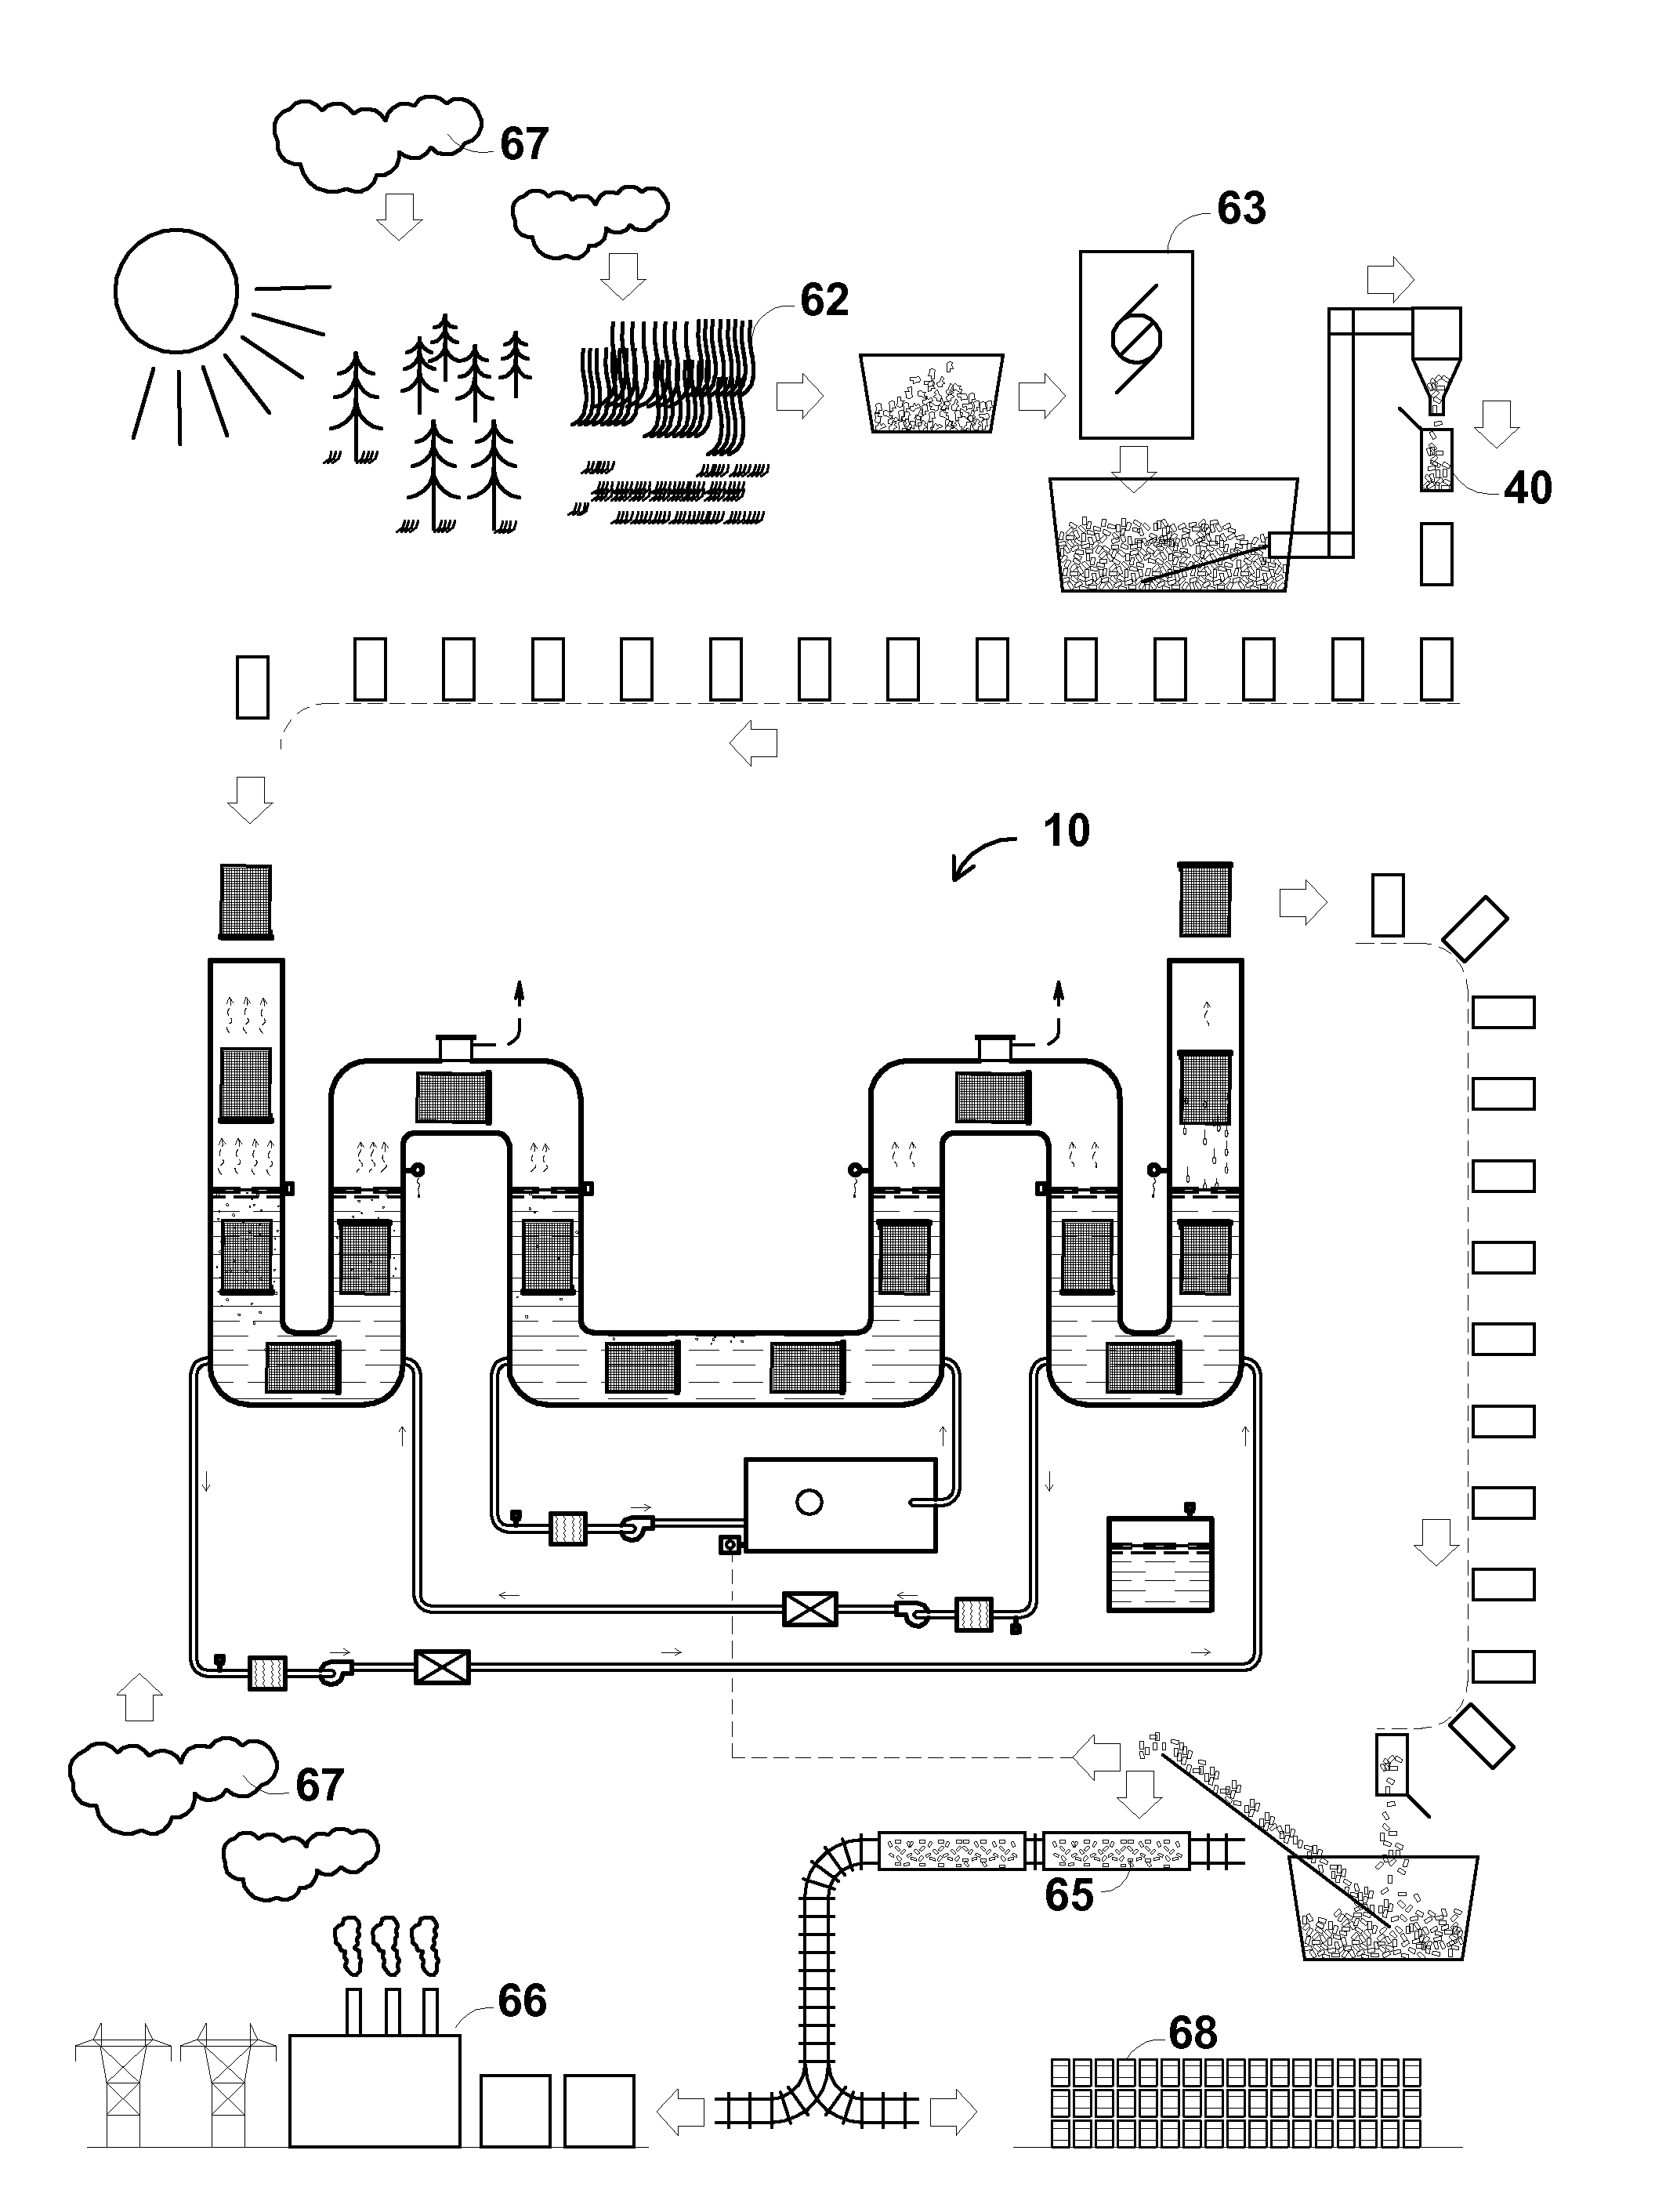 Method and apparatus for biomass torrefaction, manufacturing a storable fuel from biomass and producing offsets for the combustion products of fossil fuels and a combustible article of manufacture